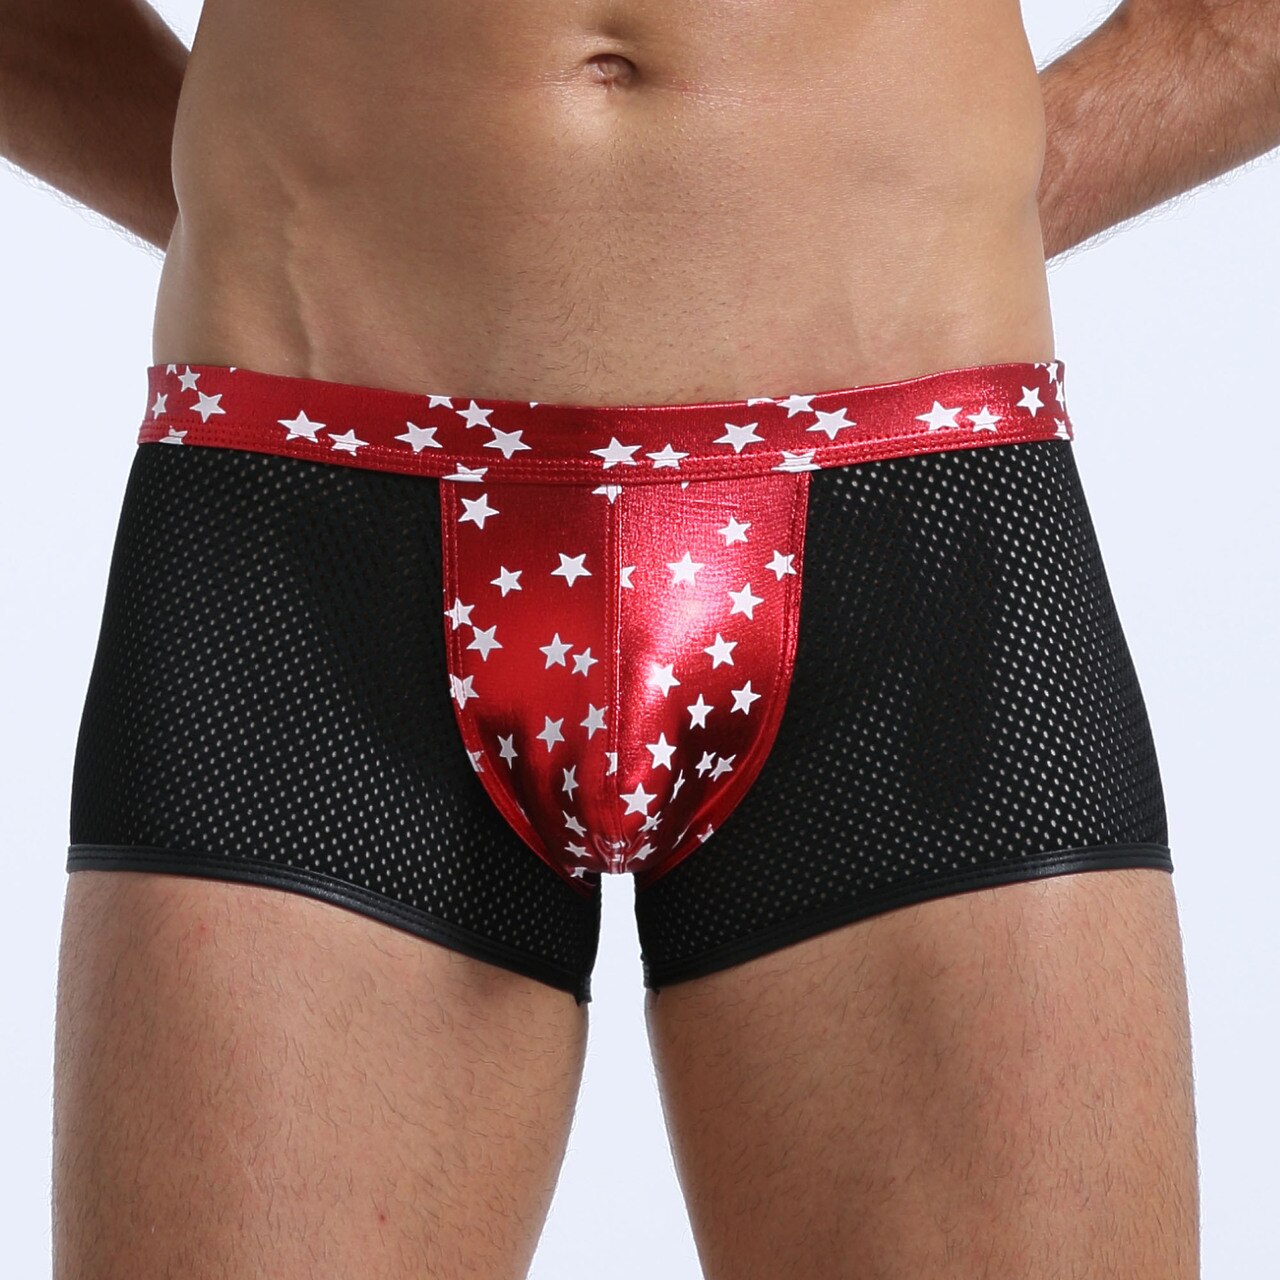 SALE - Mens Super Stars Shiny Metallic and Net Boxer Shorts Red and Black